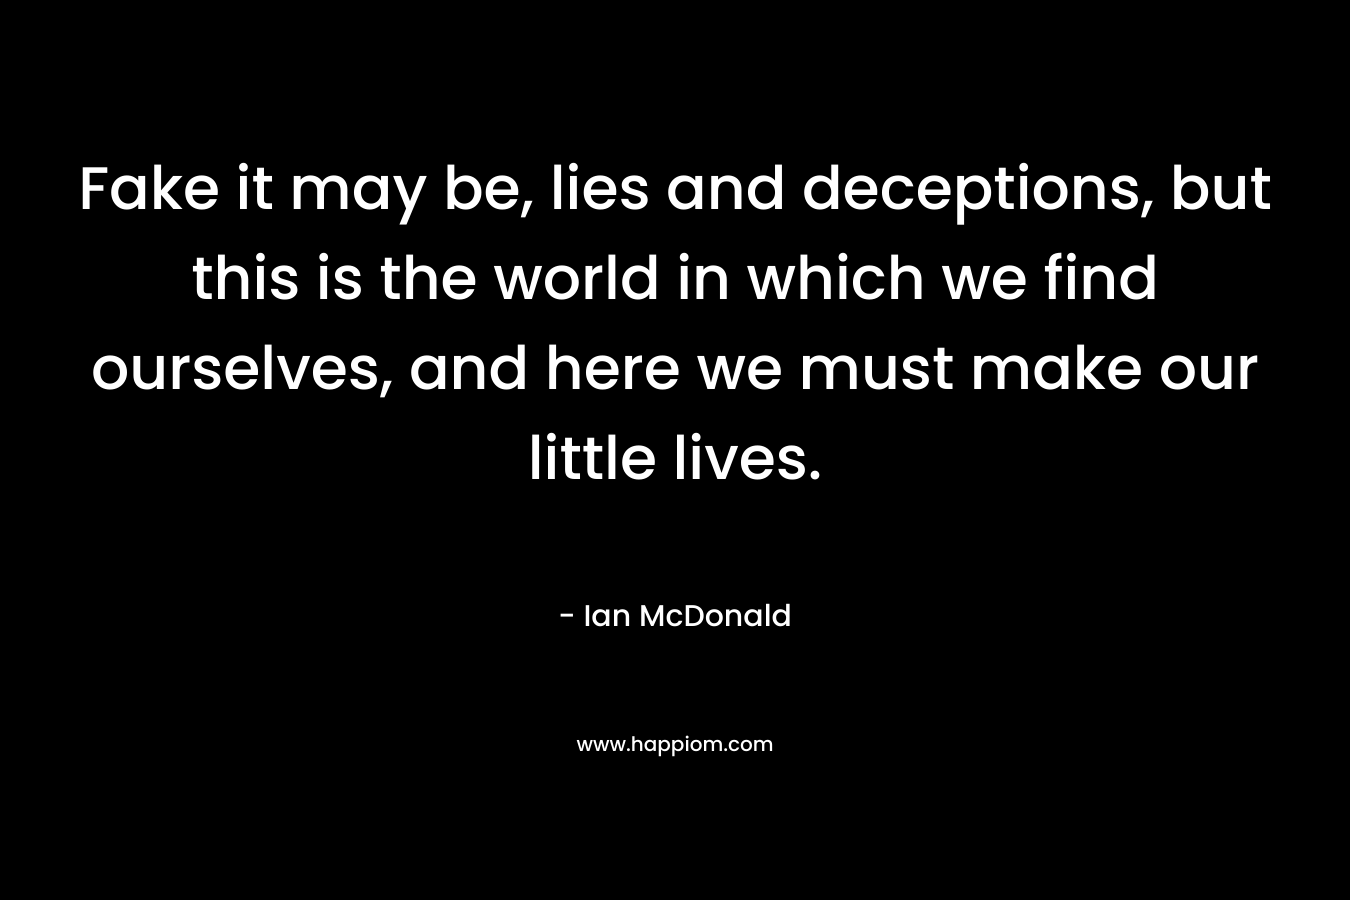 Fake it may be, lies and deceptions, but this is the world in which we find ourselves, and here we must make our little lives. – Ian McDonald